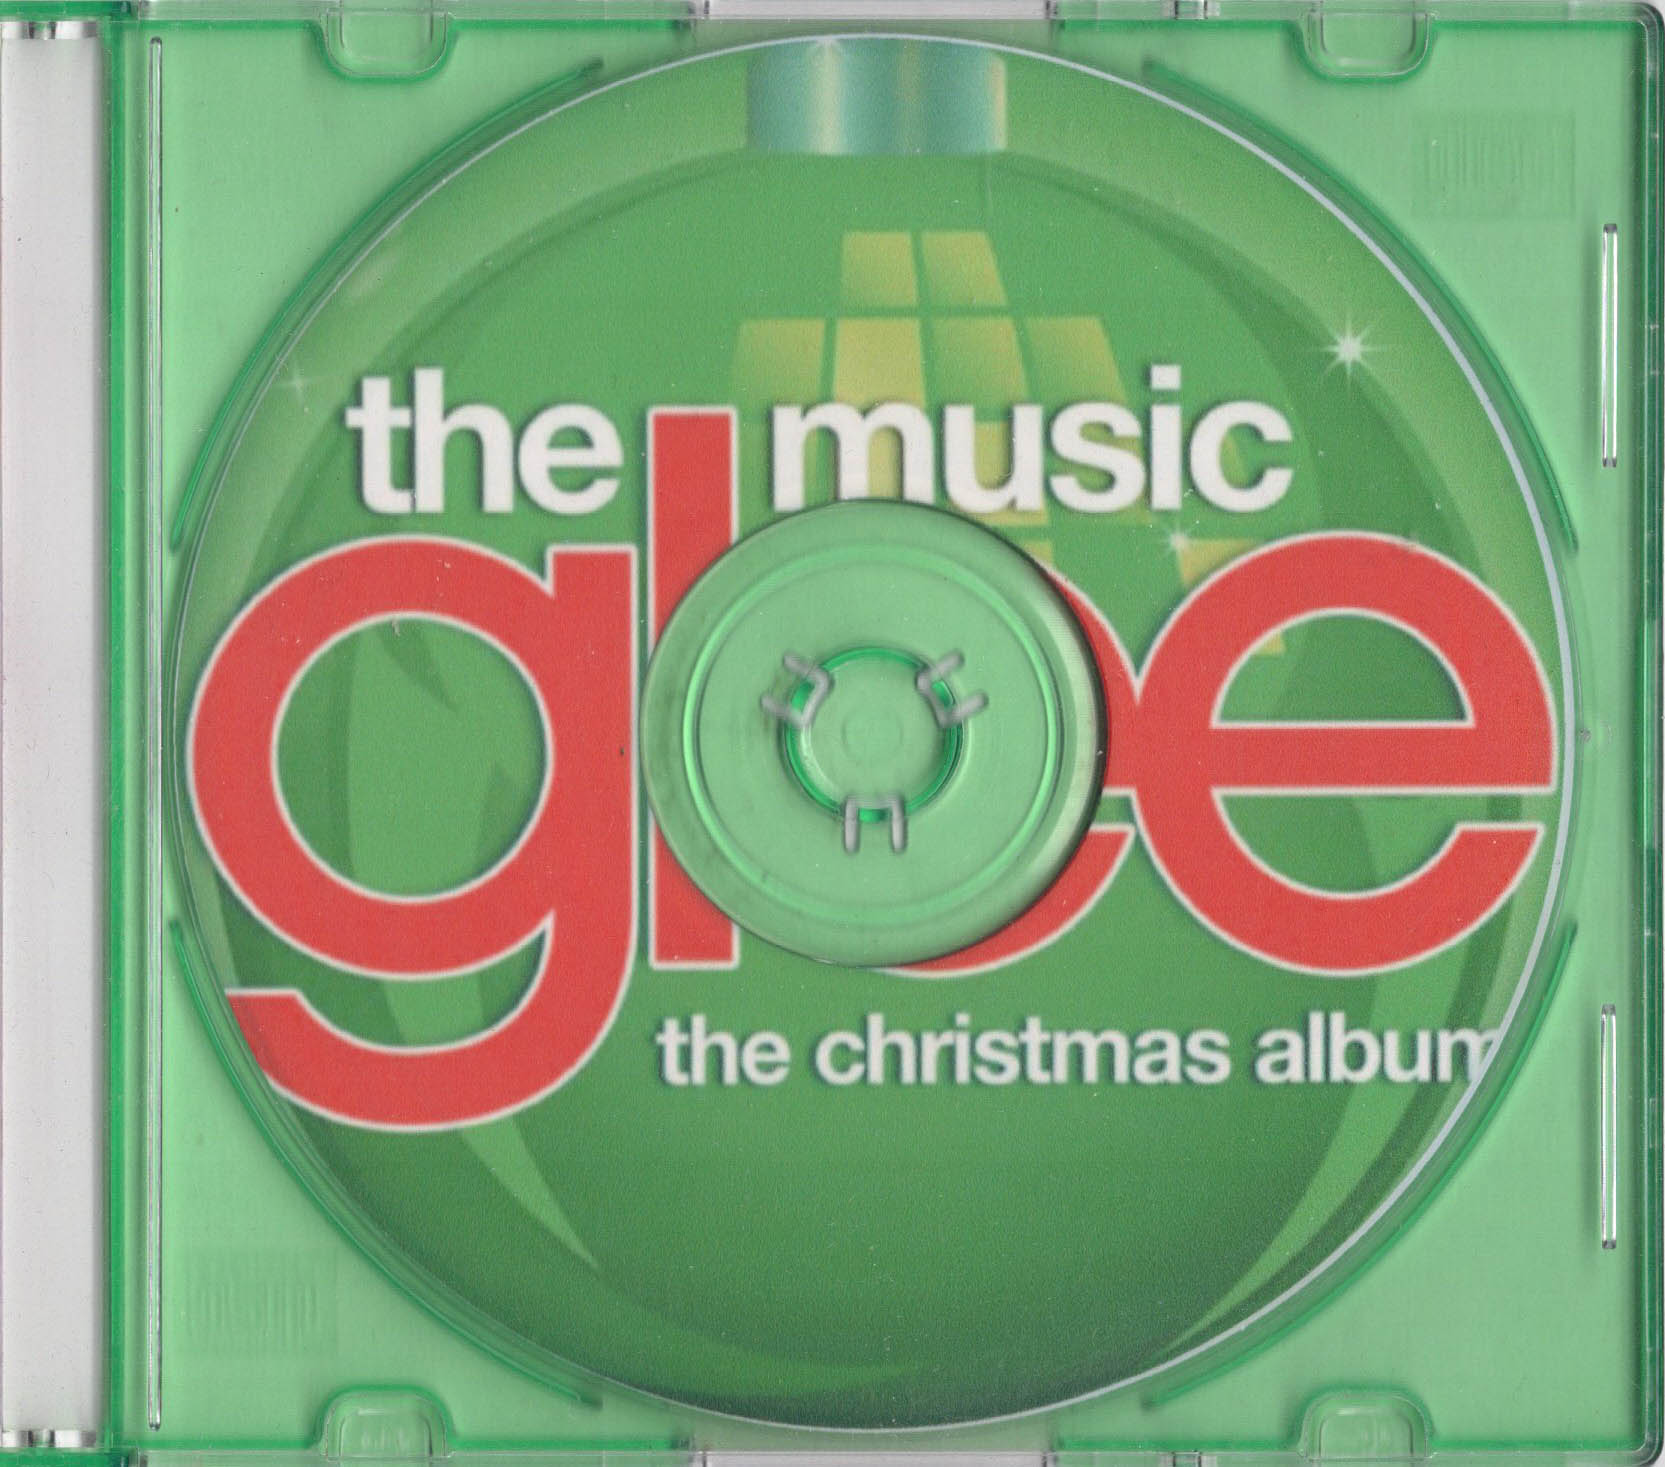 Glee: The Music, The Complete Season Two - Album by Glee Cast